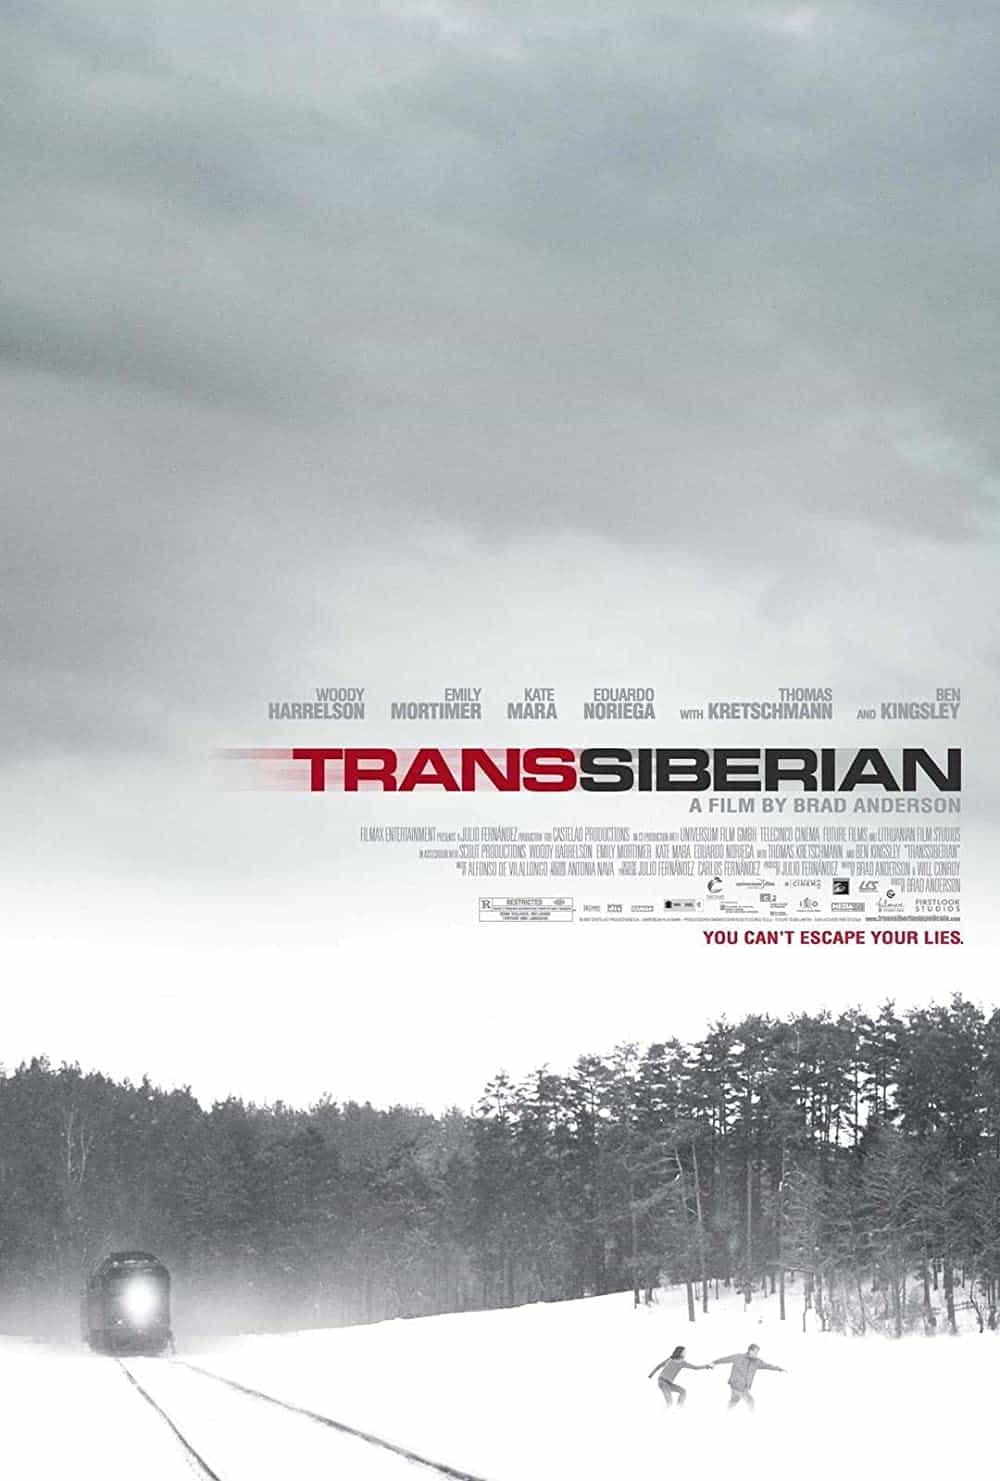 Transsiberian (2008) Best Train Movies You Can't Miss